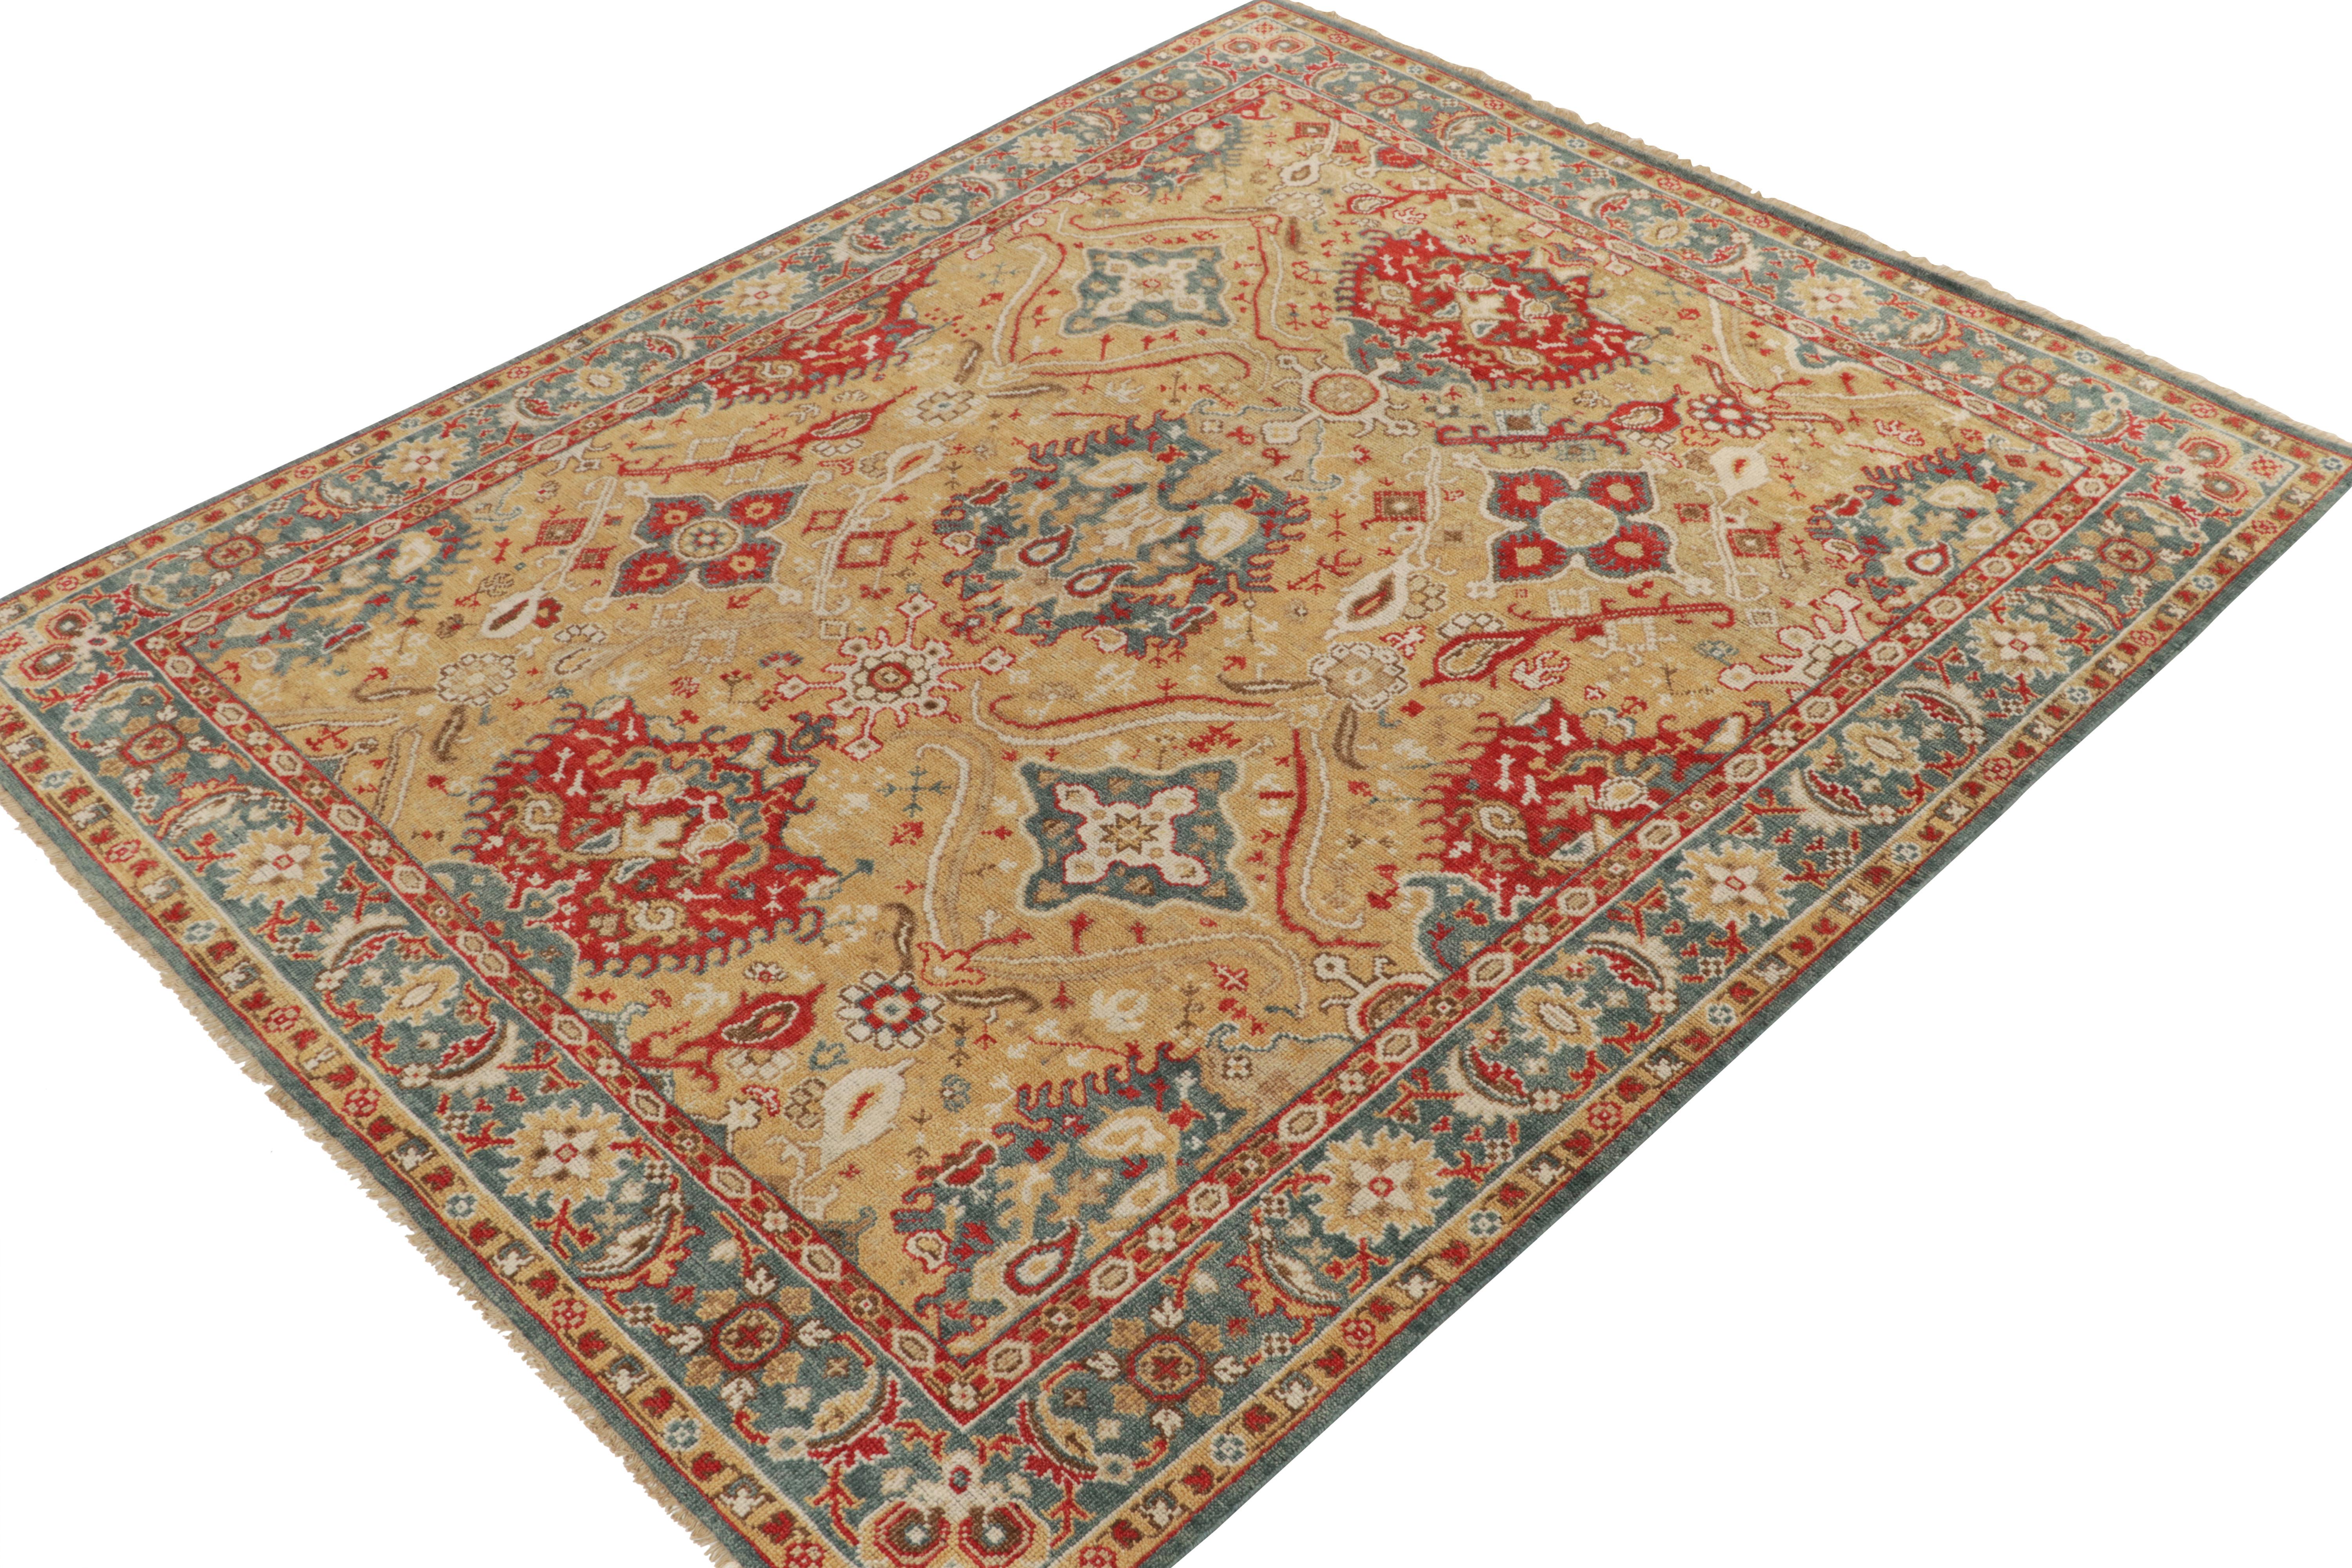 Indian Rug & Kilim's 17th Century Oushak Style Rug in Brown, Blue and Red Florals For Sale